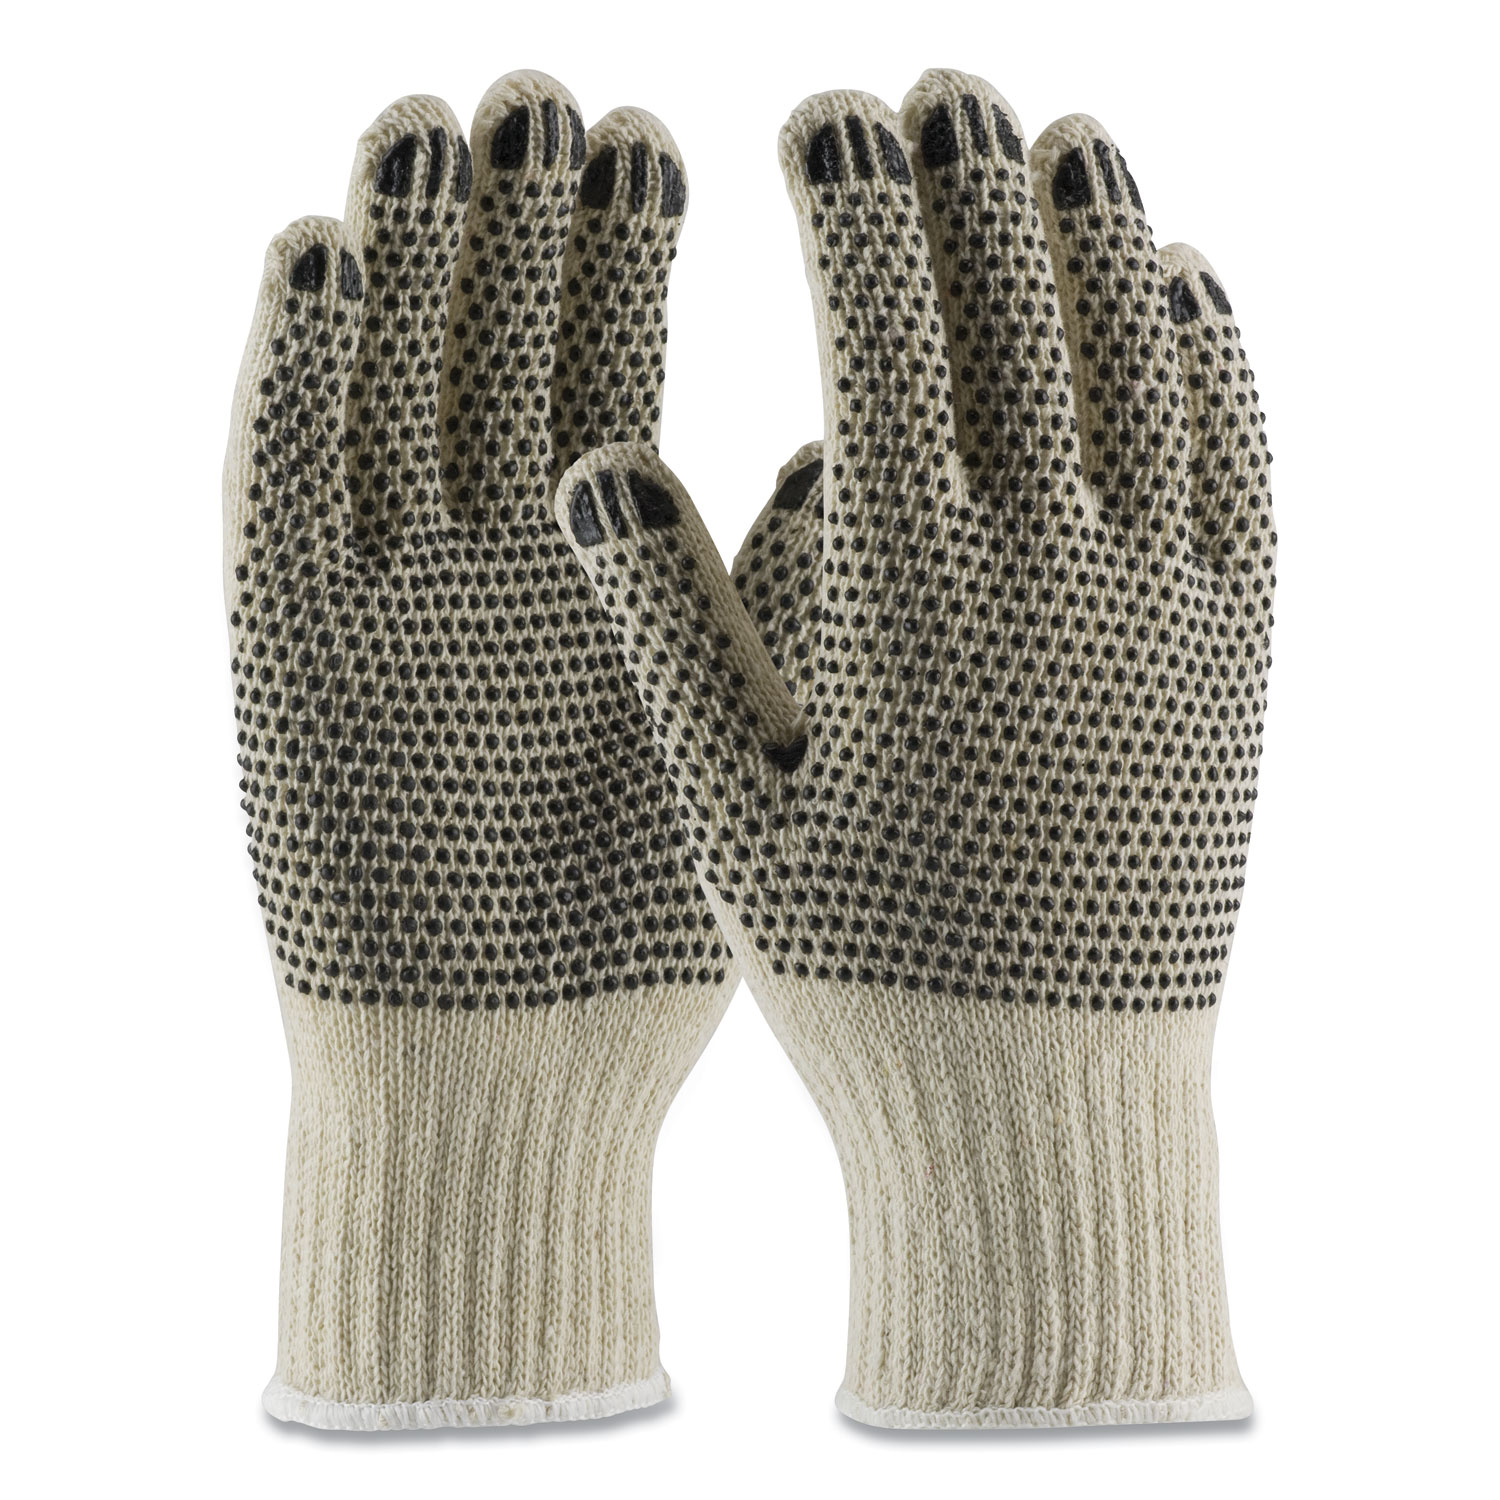  PIP 36-110PDD/L PVC-Dotted Cotton/Polyester Work Gloves, Large, Gray/Black, 12 Pairs (PID177102) 